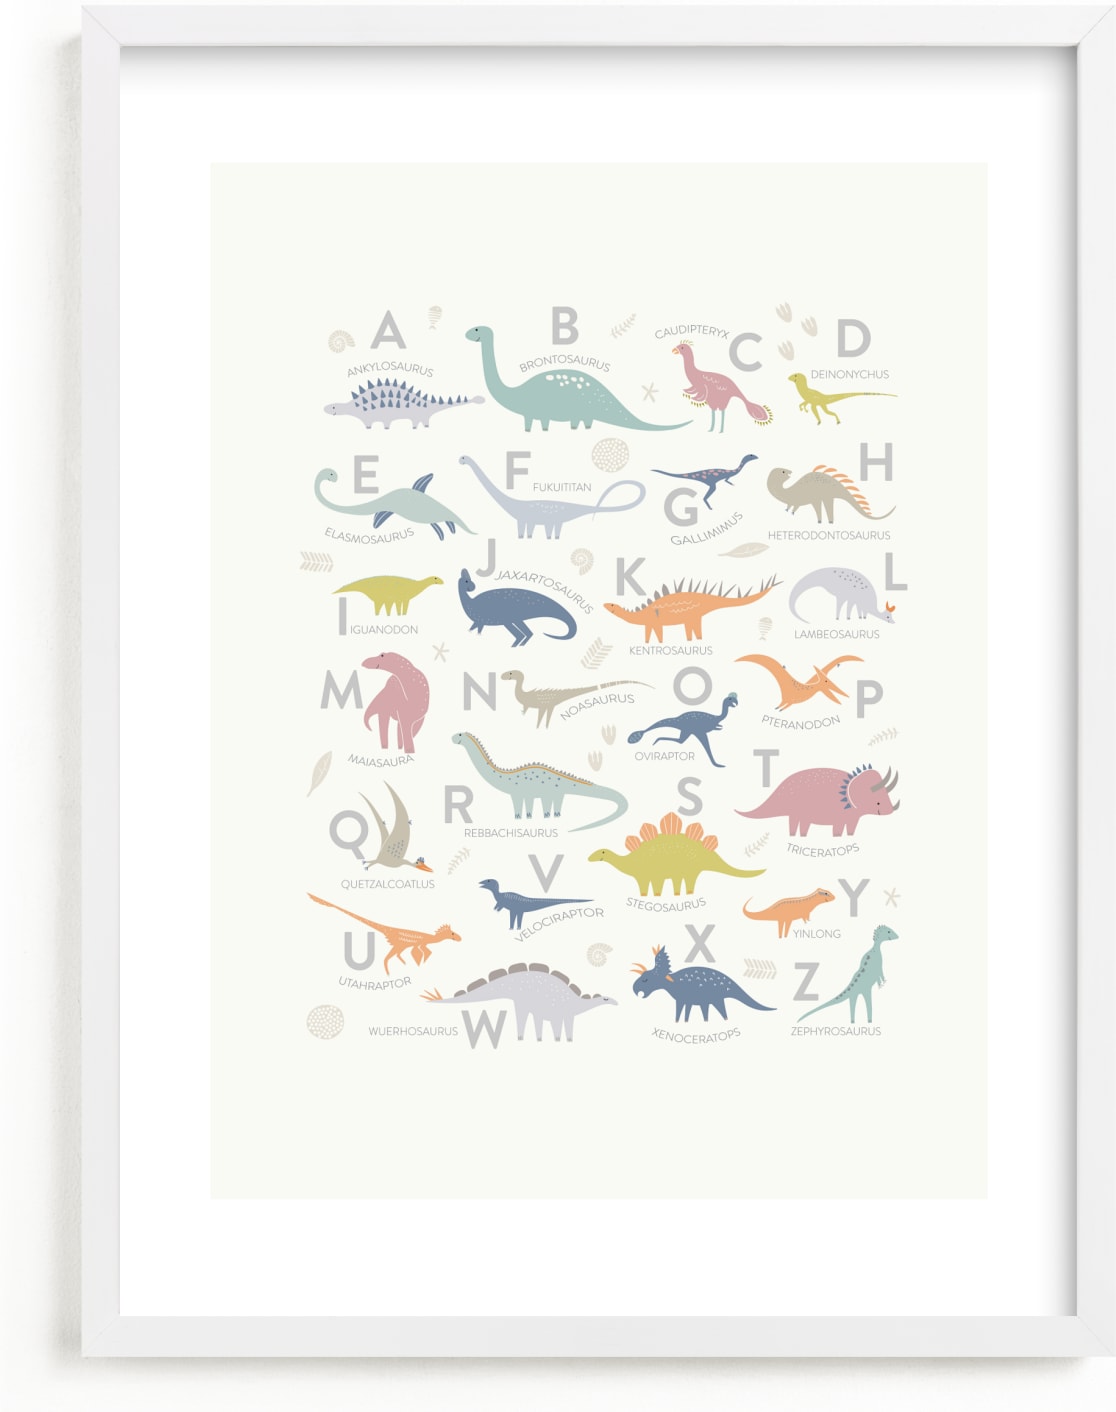 This is a colorful art by Teju Reval called Alphabet Dinos.